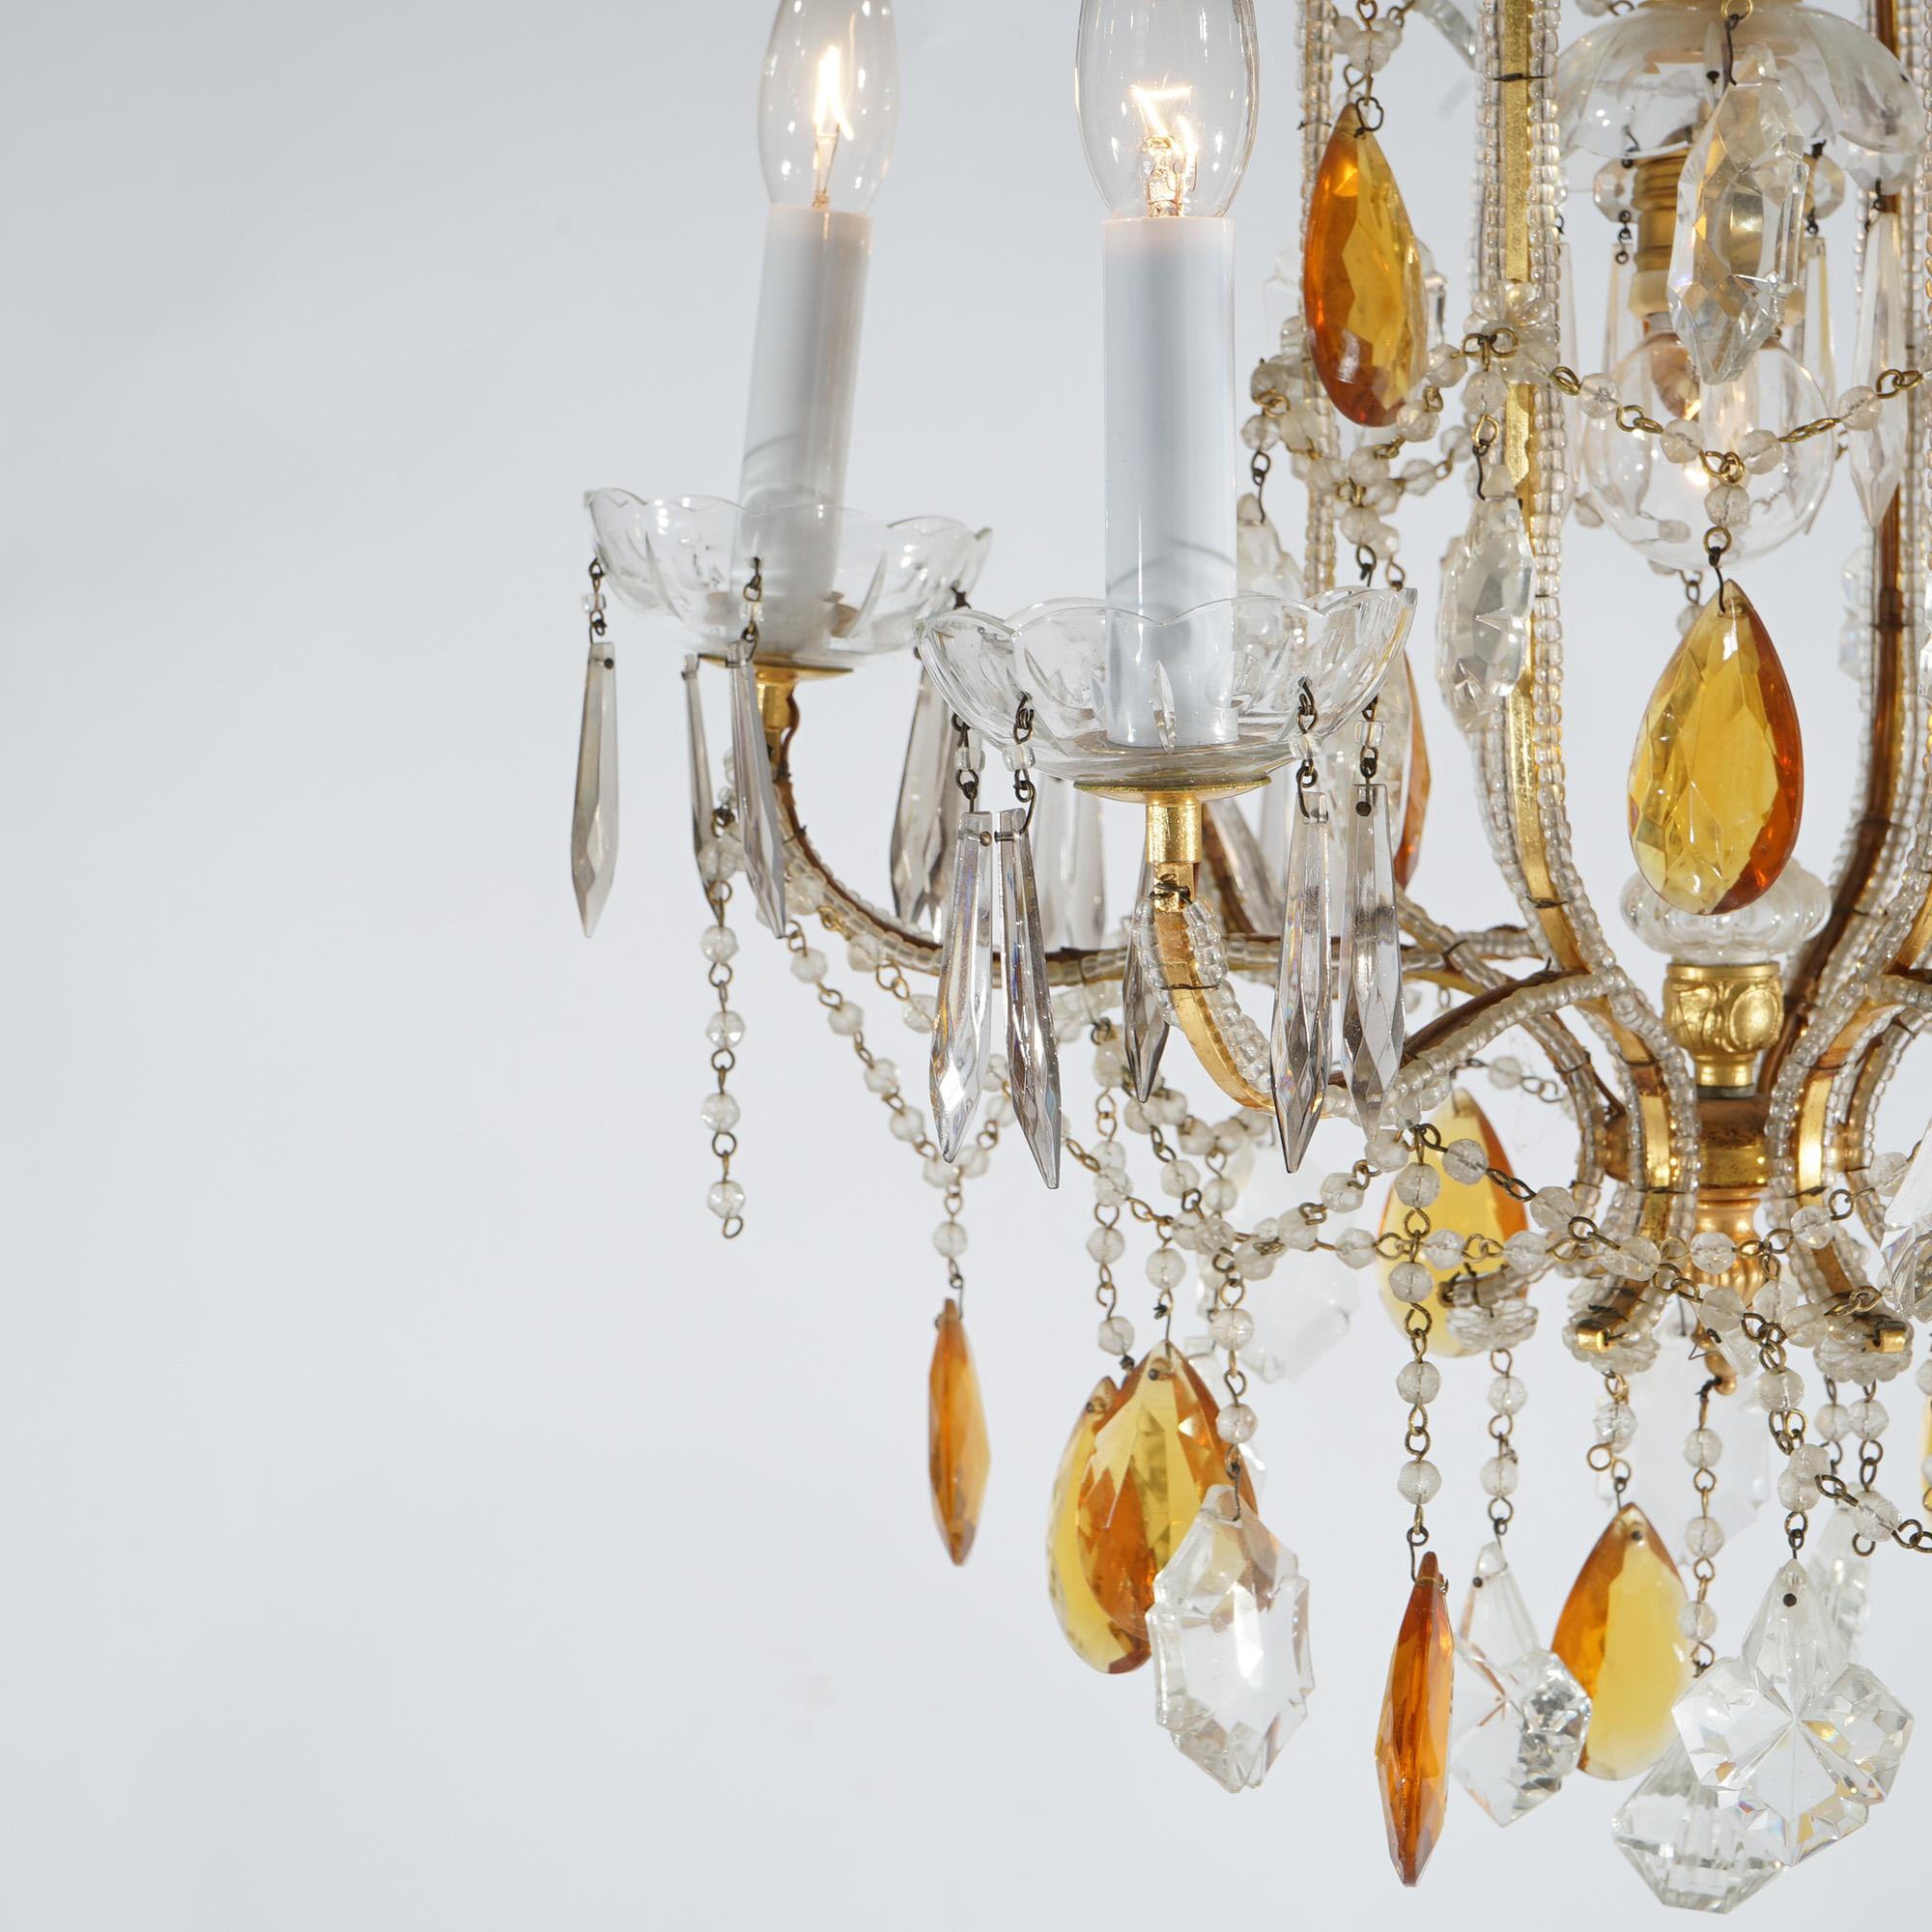 French Louis. XIV Style Seven-Light Crystal Chandelier with Amber Prisms, 20th C For Sale 4